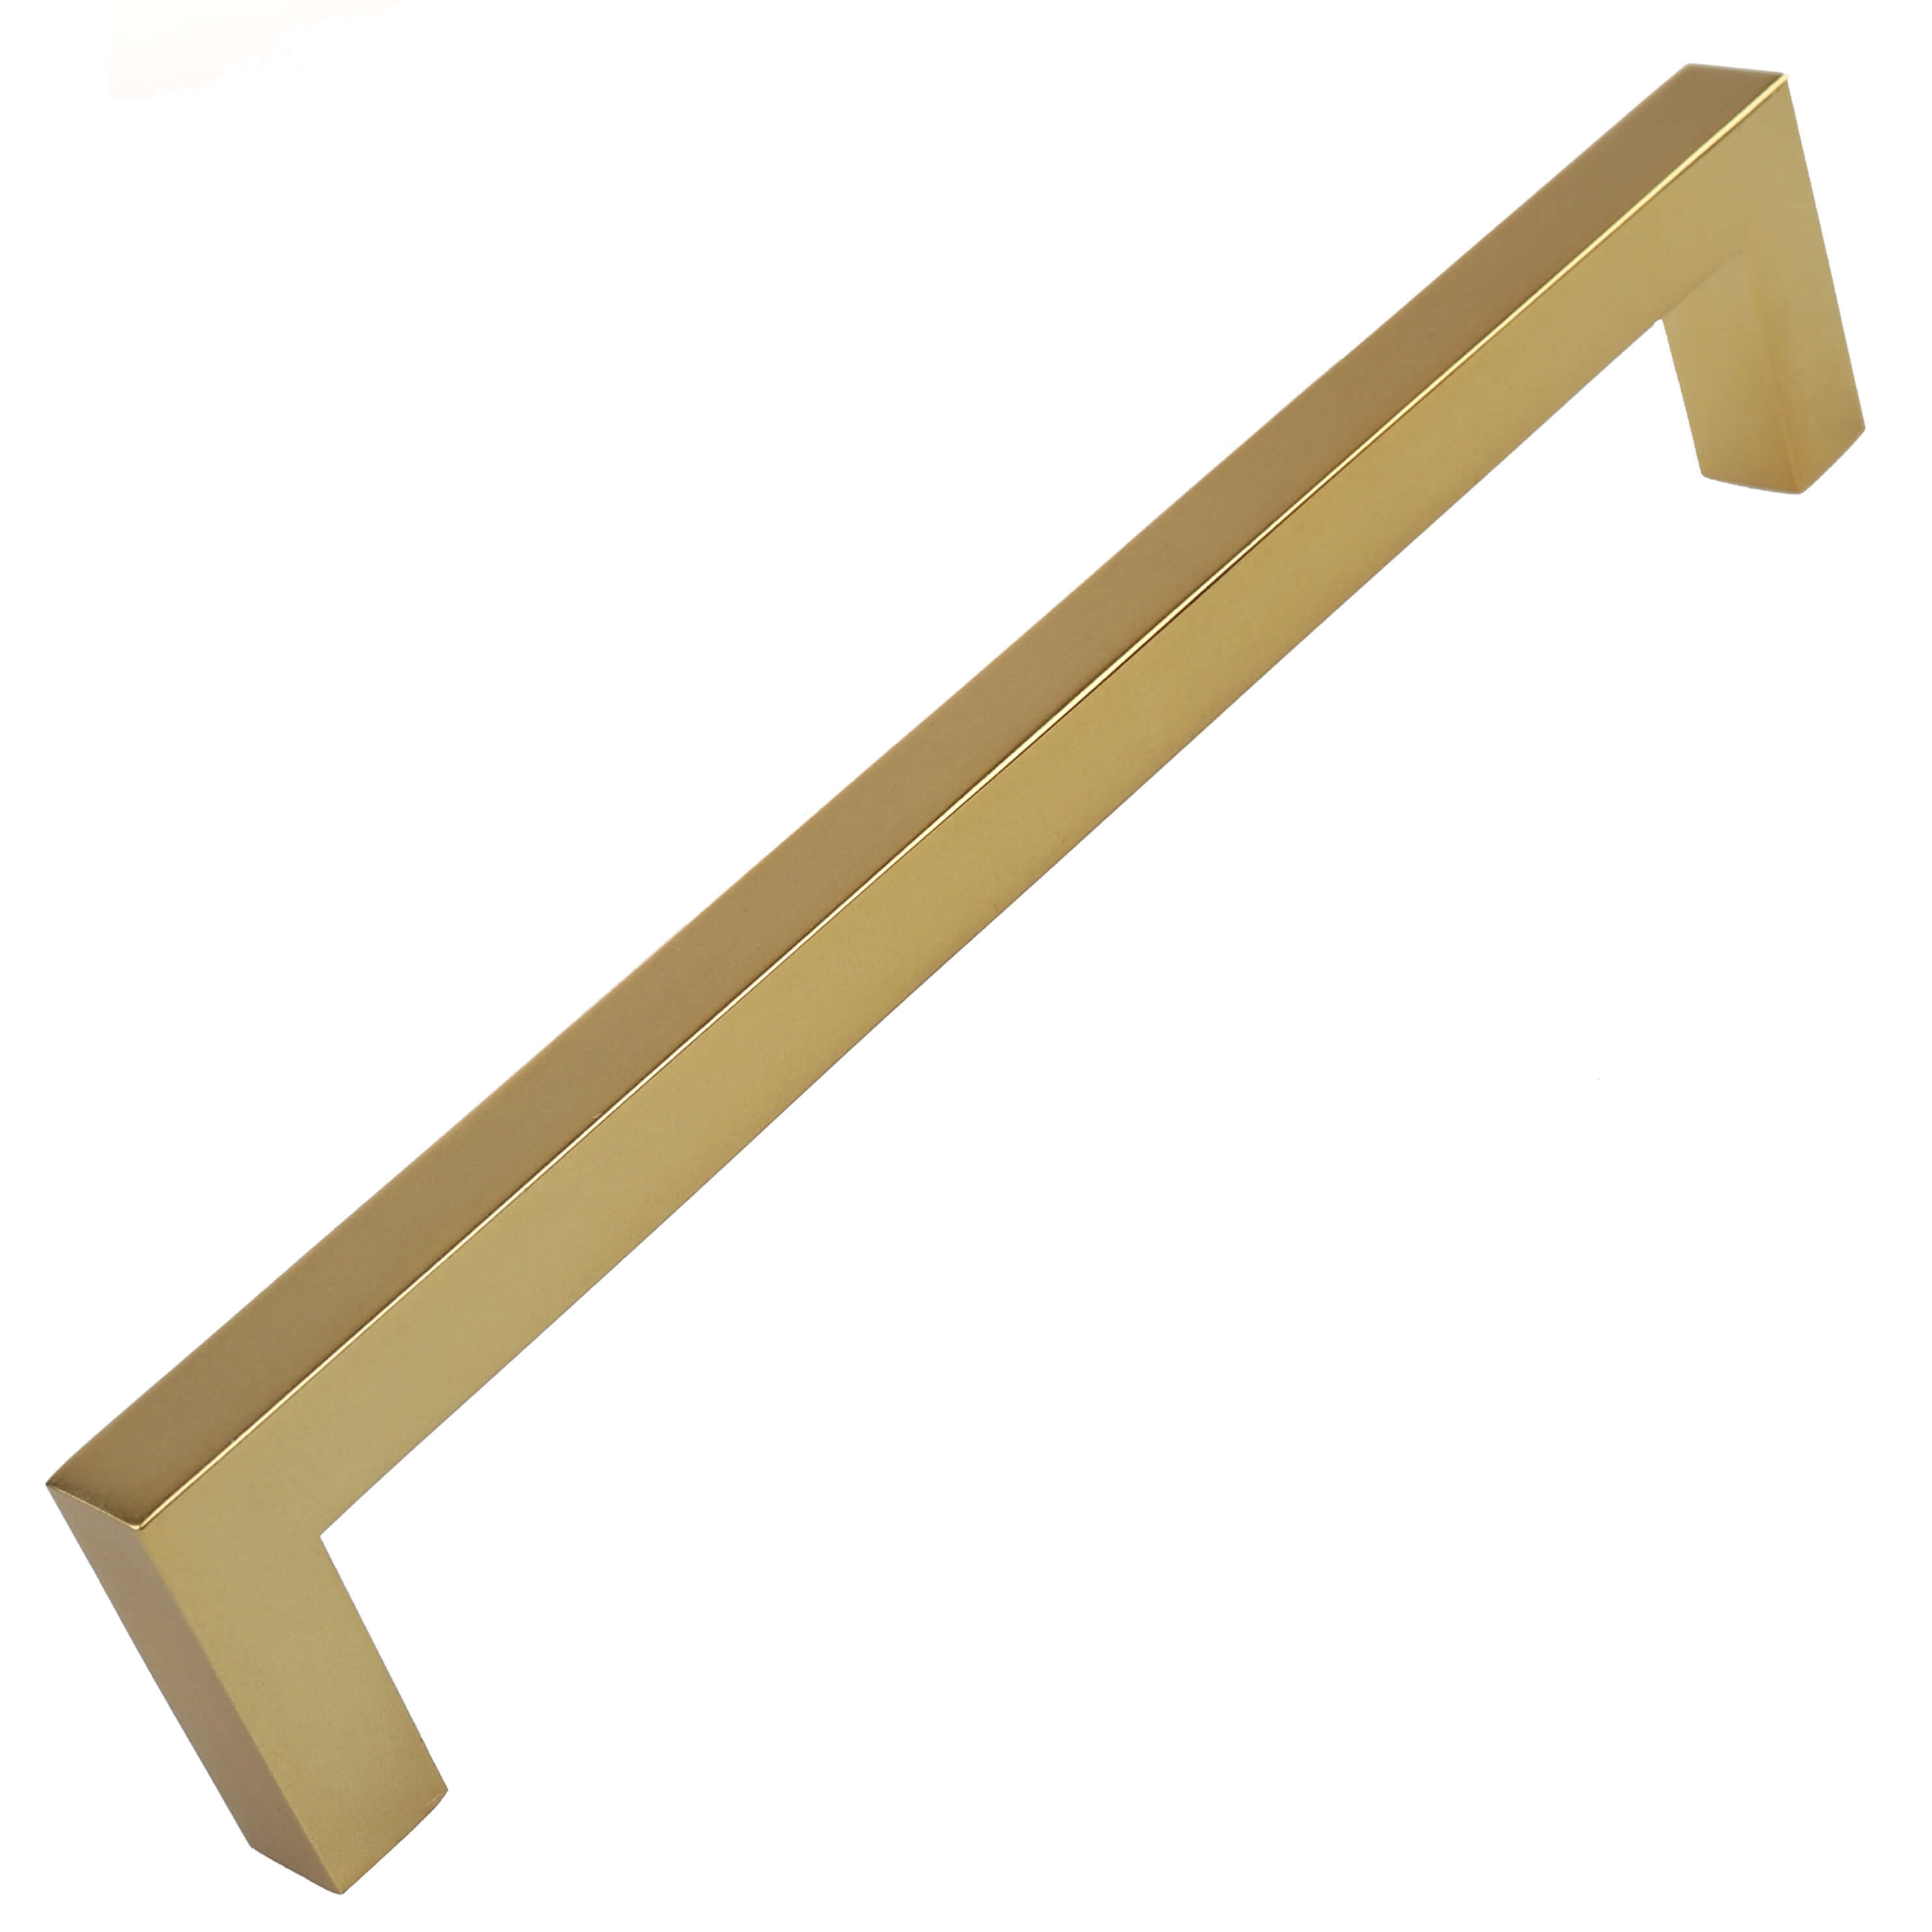 GlideRite 6-1/4 in. Center Solid Square Bar Cabinet Pulls, Brass Gold, Pack of 10 - image 1 of 3